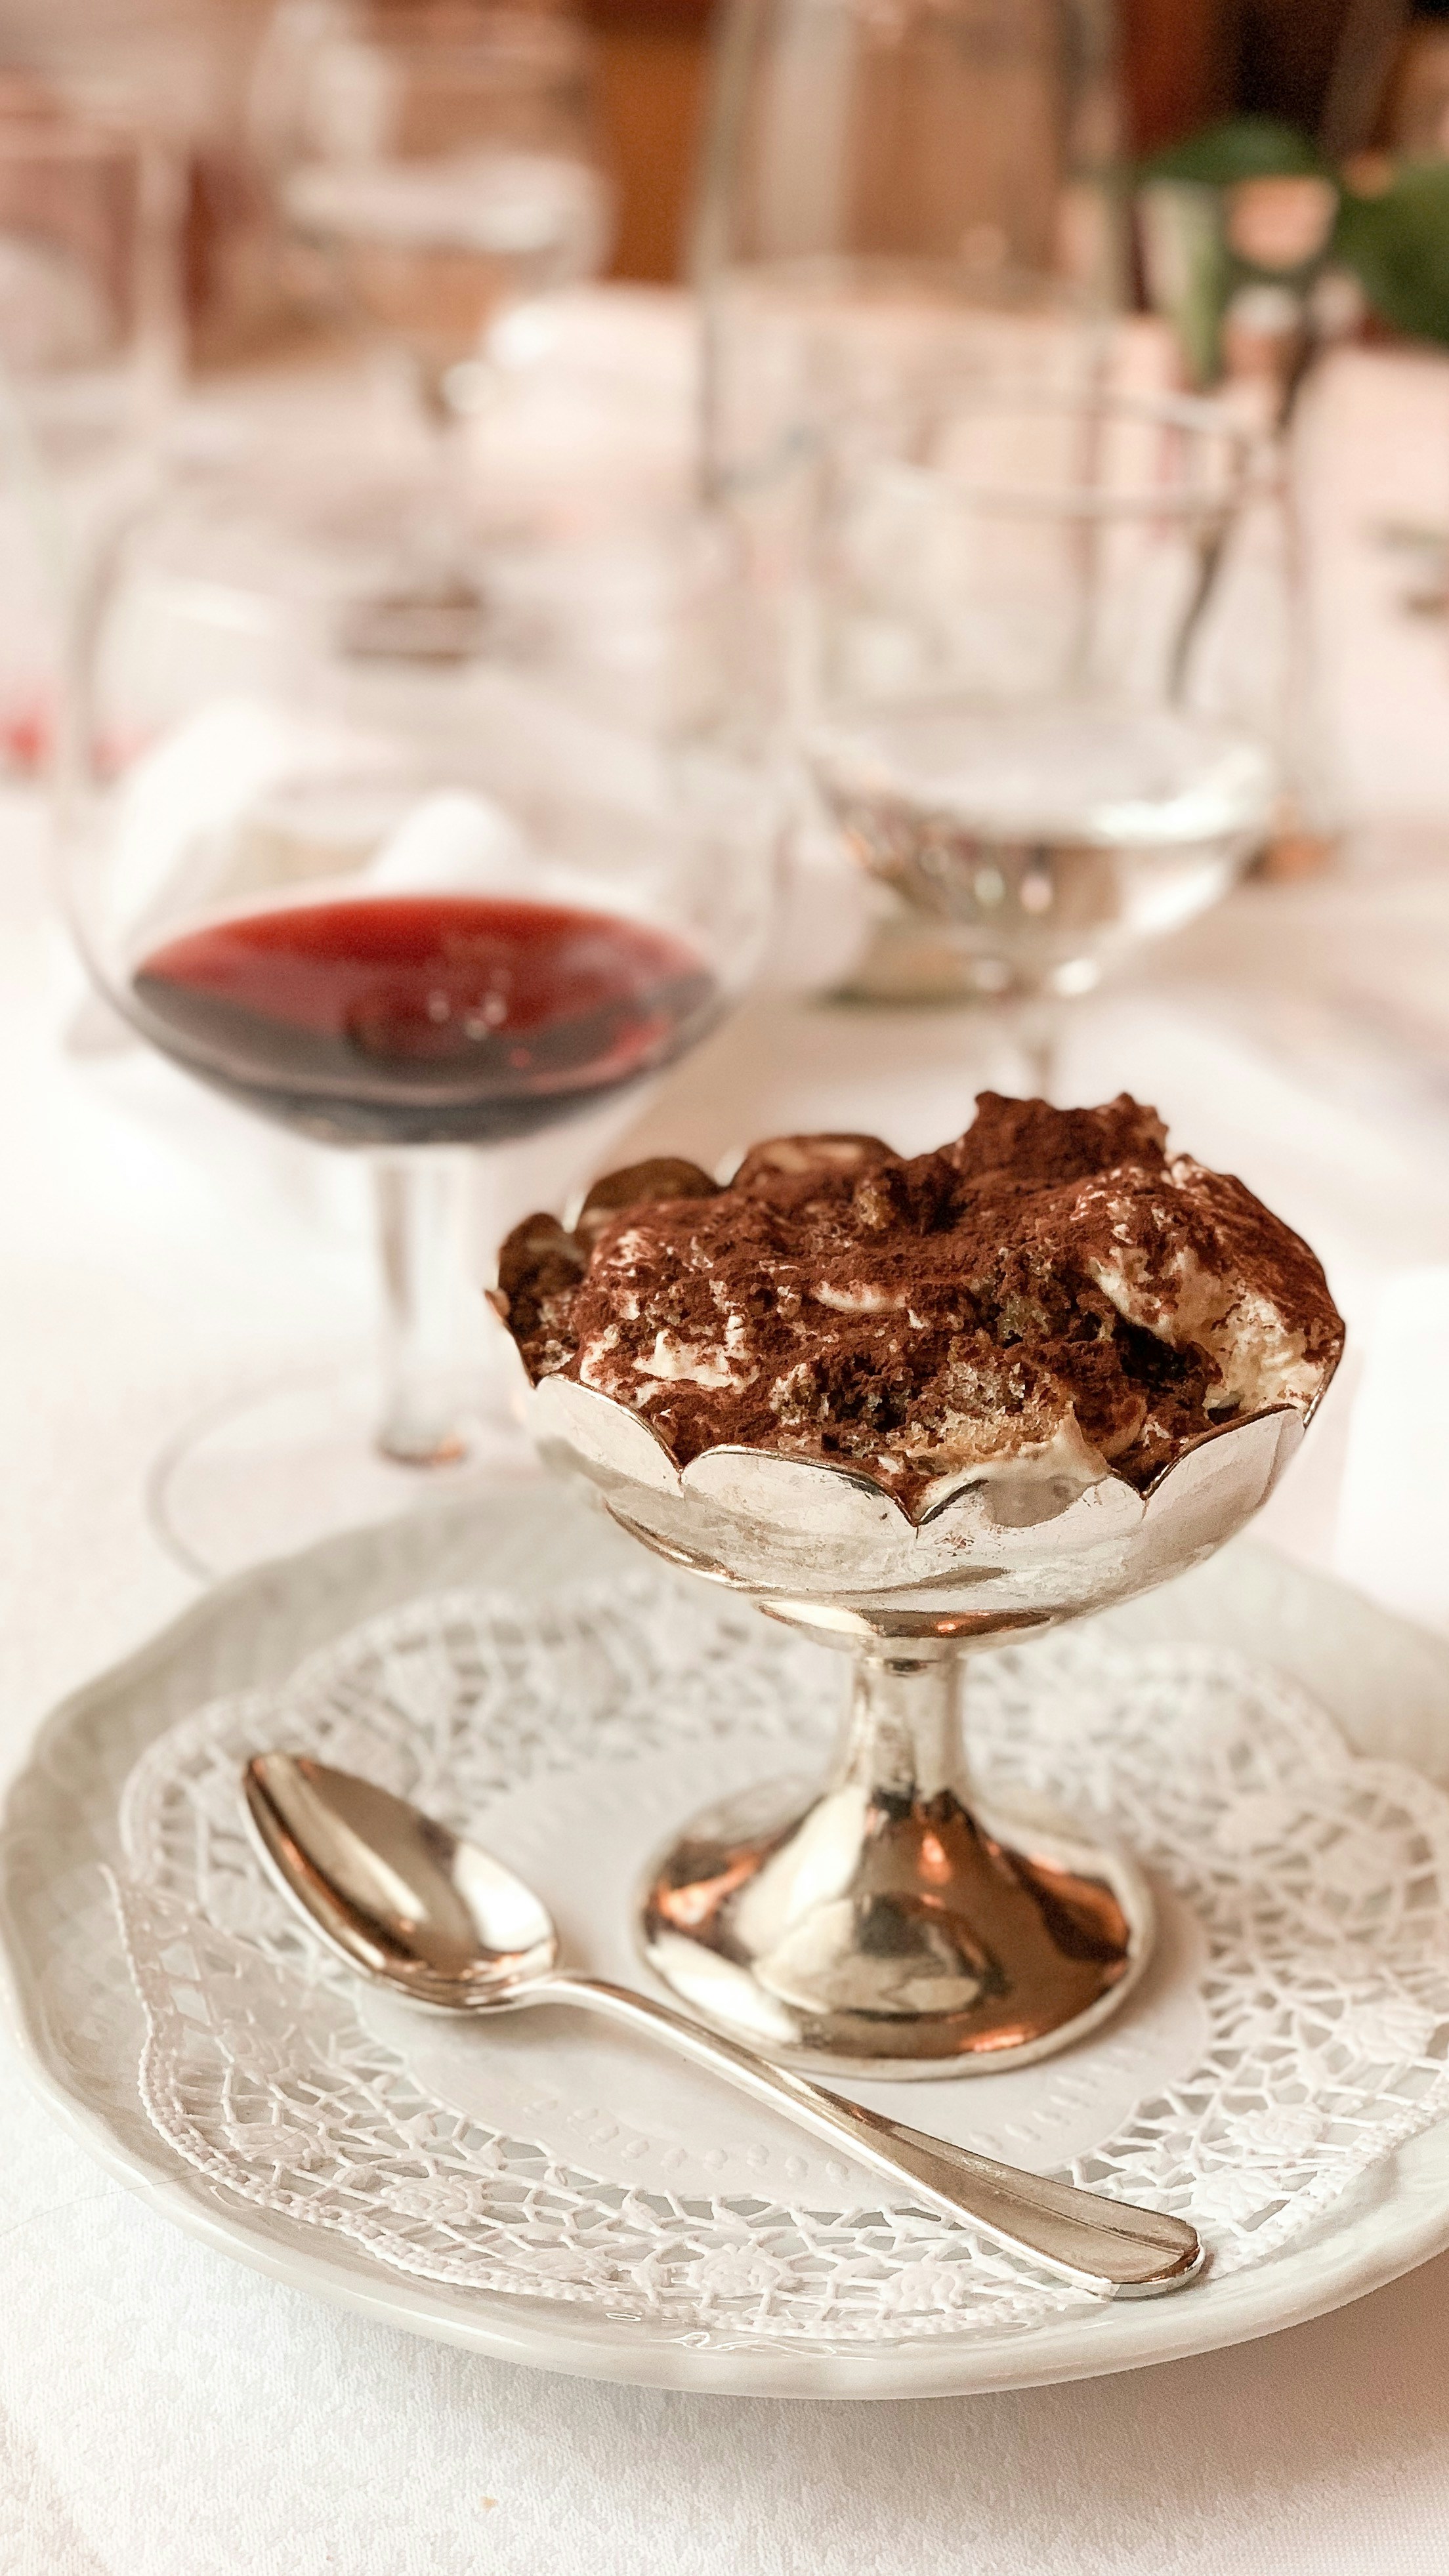 A cup of tiramisu with a glass of red wine at a restaurant